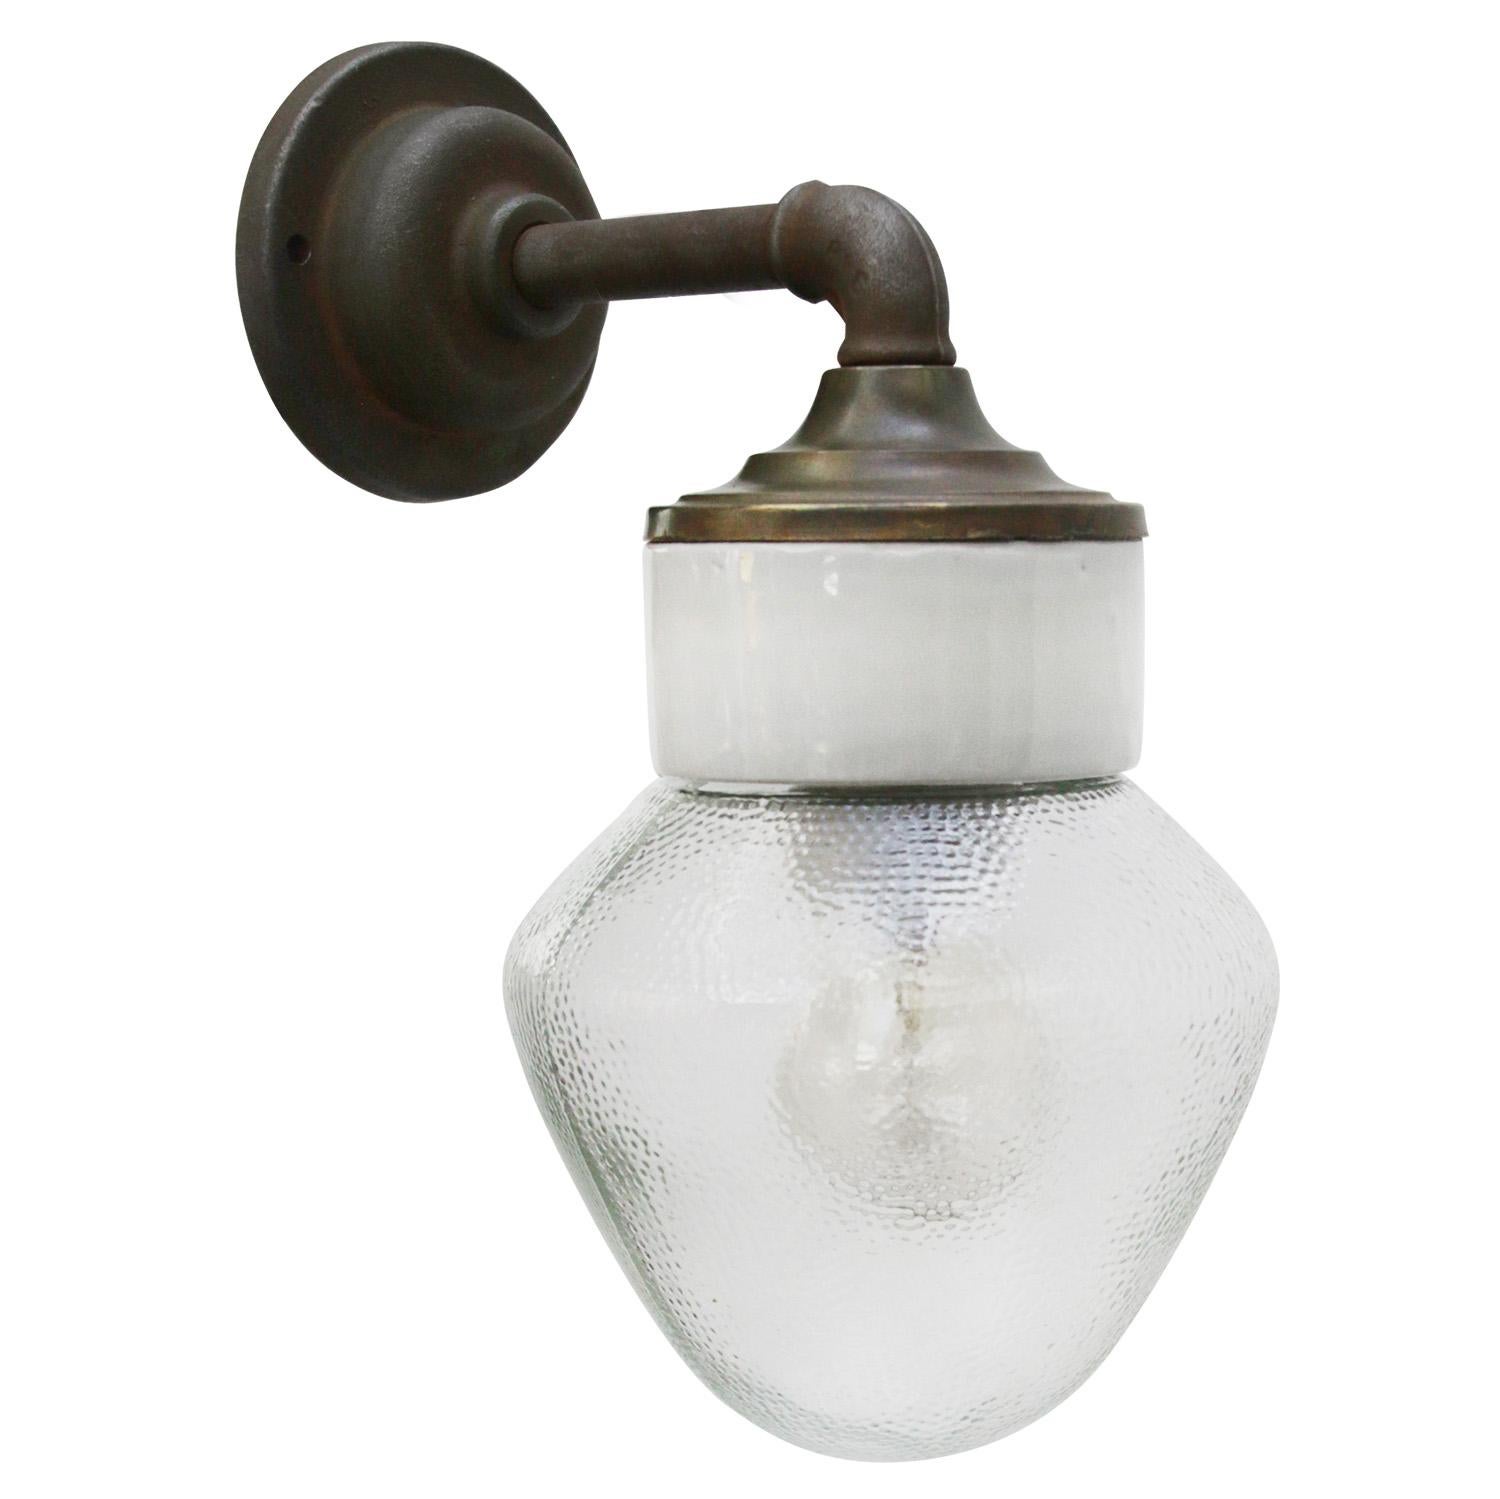 Porcelain Industrial wall lamp.
White porcelain, brass and cast iron
Frosted glass.
2 conductors, no ground.

Diameter wall mount 10.5 cm / 4”.
2 holes to secure.

For use inside only

Weight: 2.20 kg / 4.9 lb

Priced per individual item. All lamps